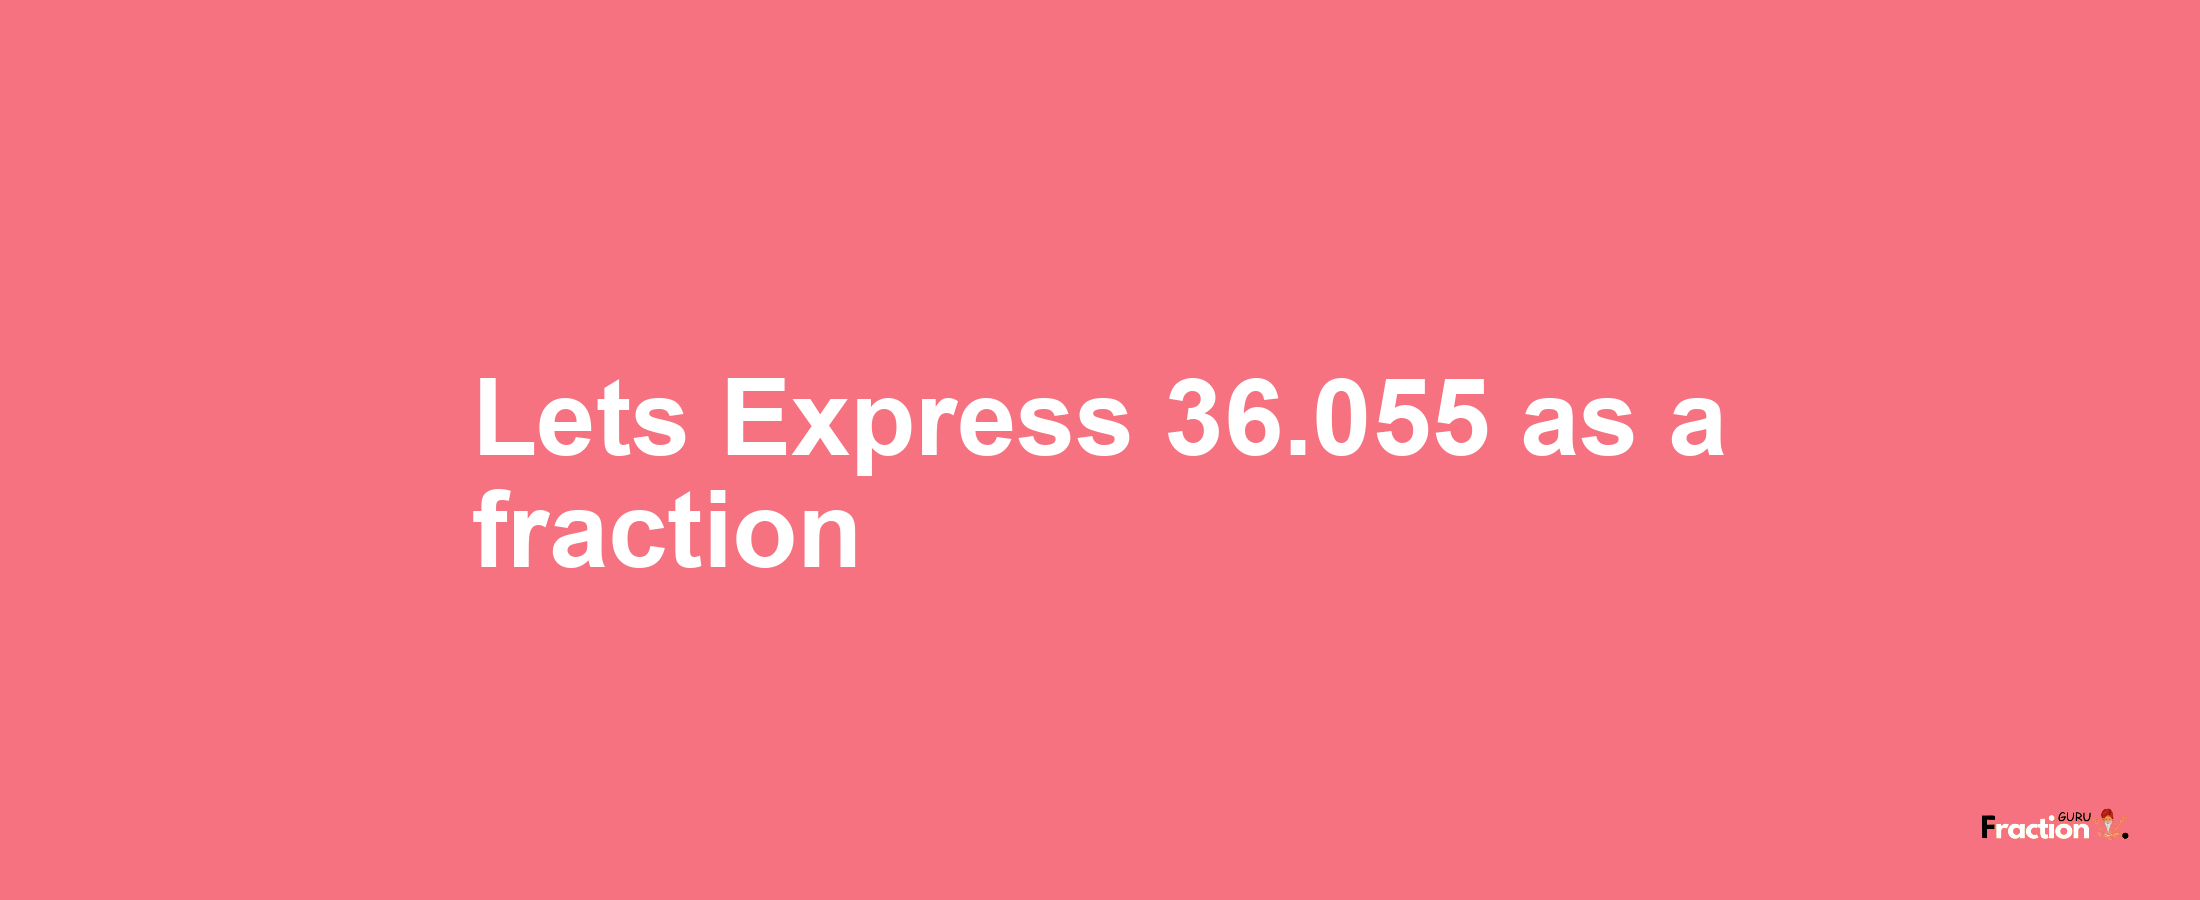 Lets Express 36.055 as afraction